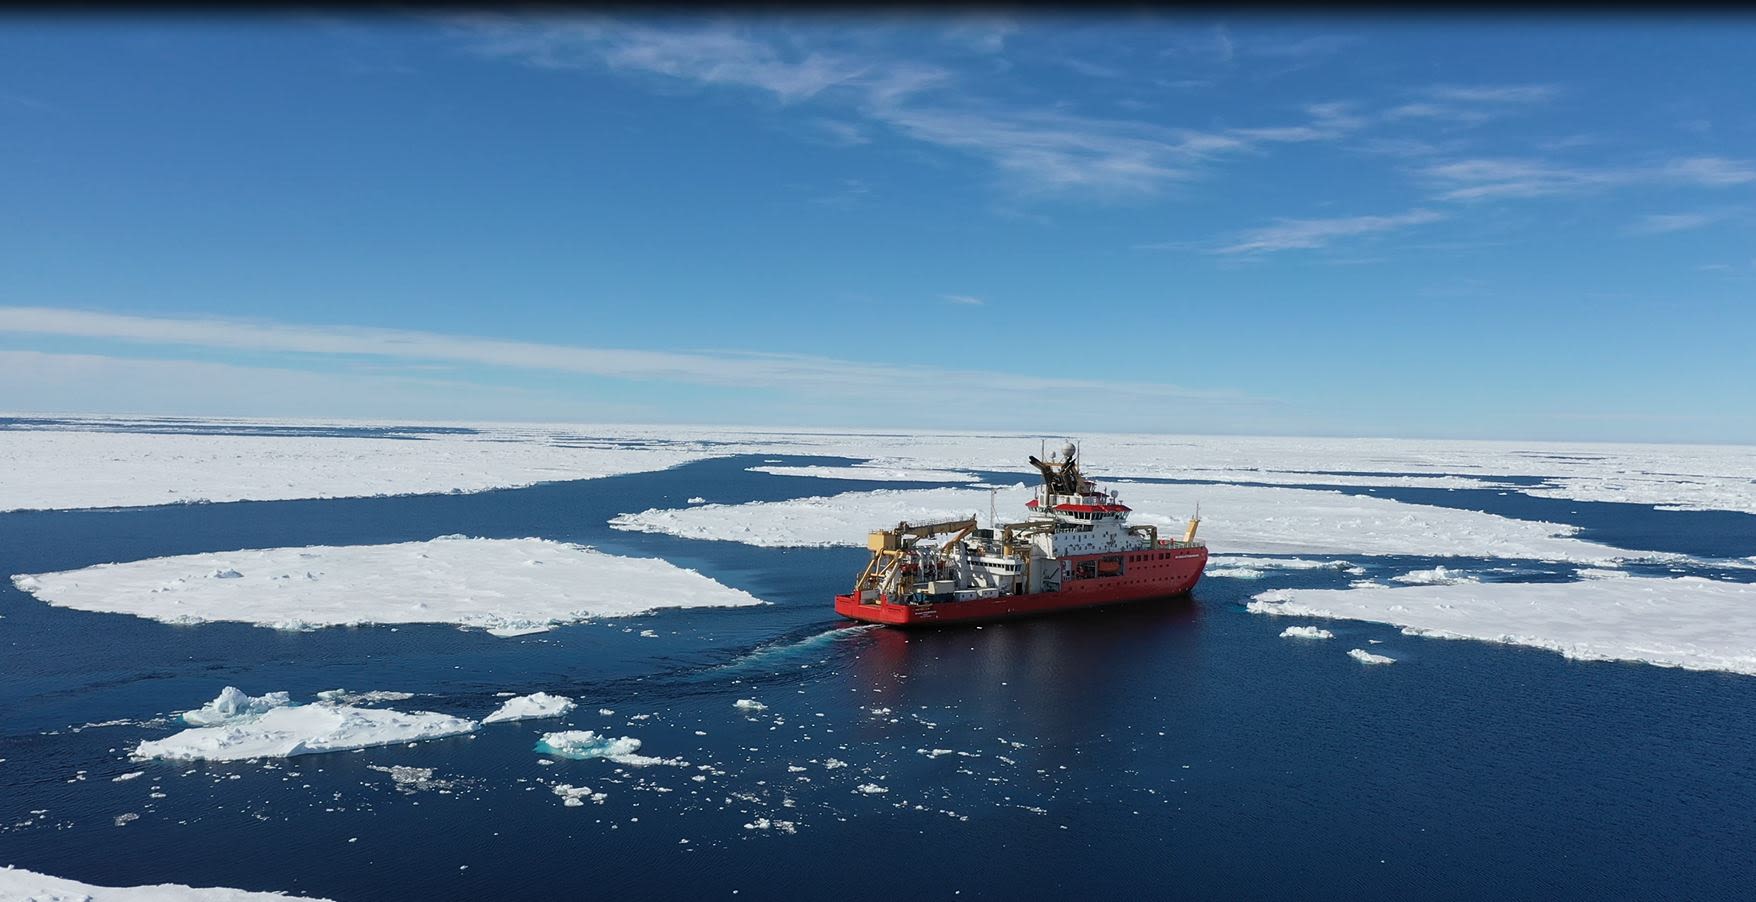 A ship sails through a sea covered in ice floe.